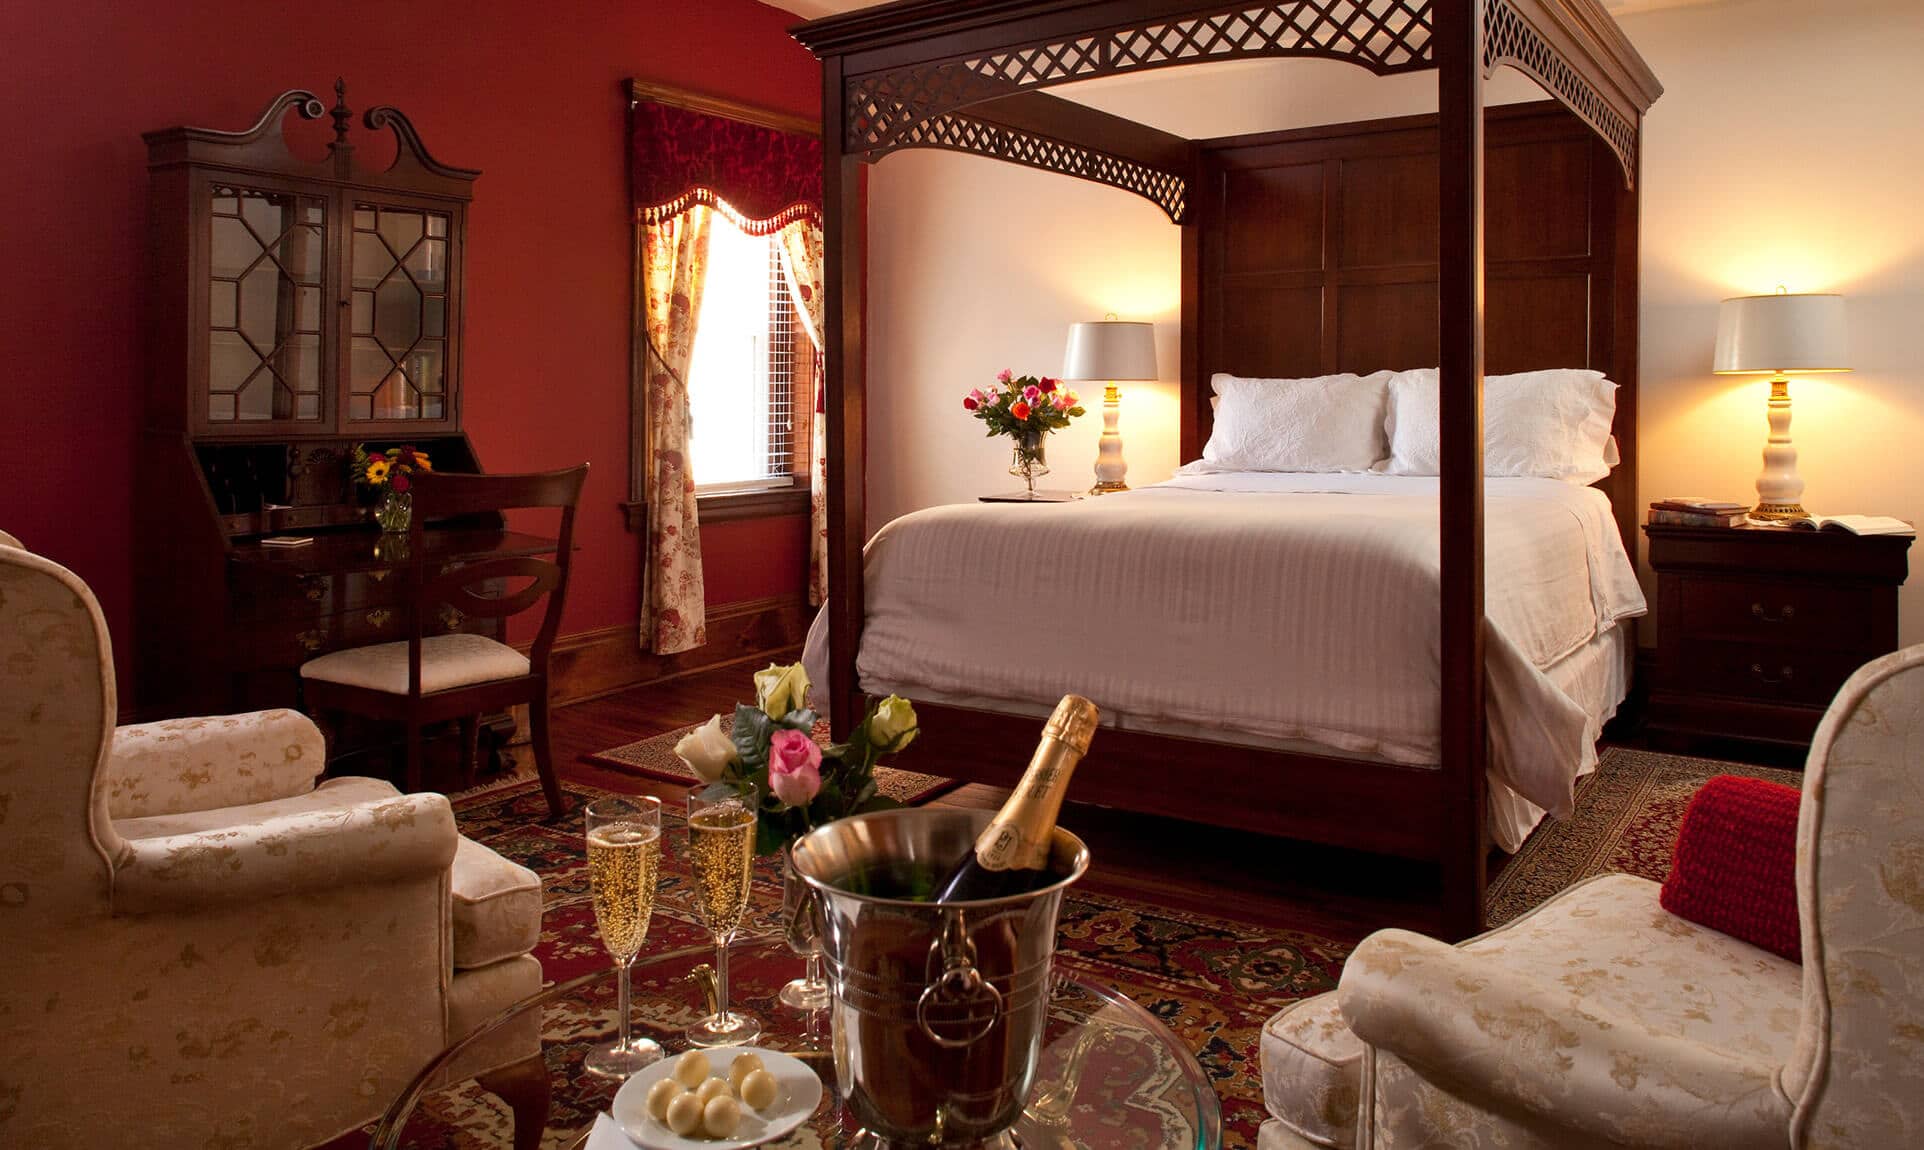 Romantic Bed and breakfast in Washington DC